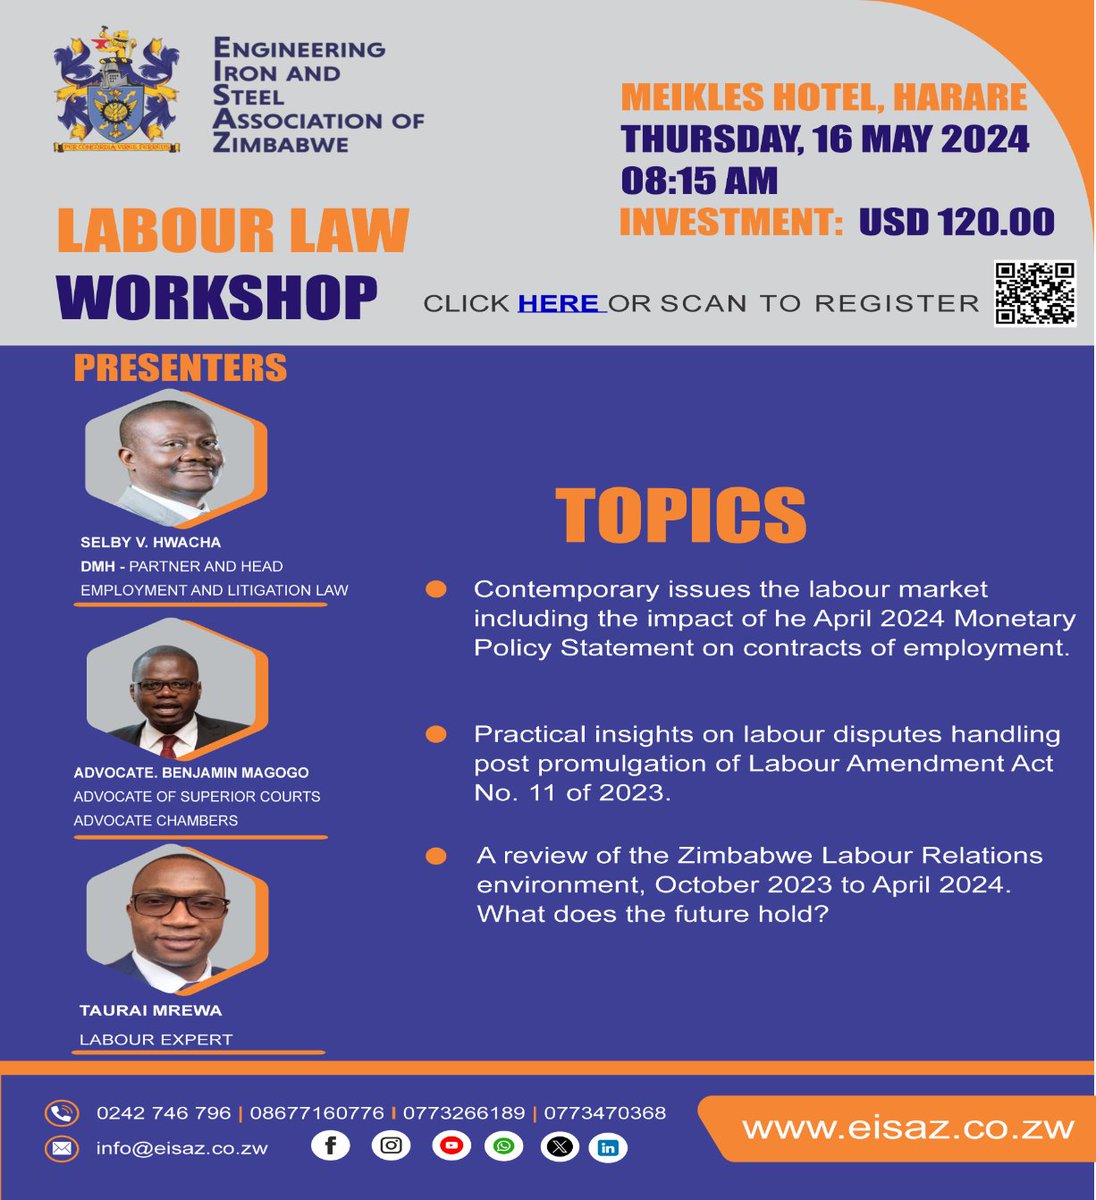 The Engineering Iron and Steel Association of Zimbabwe proudly hosts its 2024 1st edition of Labour Law Workshop at the Meikles Hotel, Harare, Zimbabwe on 16th May 2024.The workshop will explore a wide range of topics and issues related to the labour law especially given the